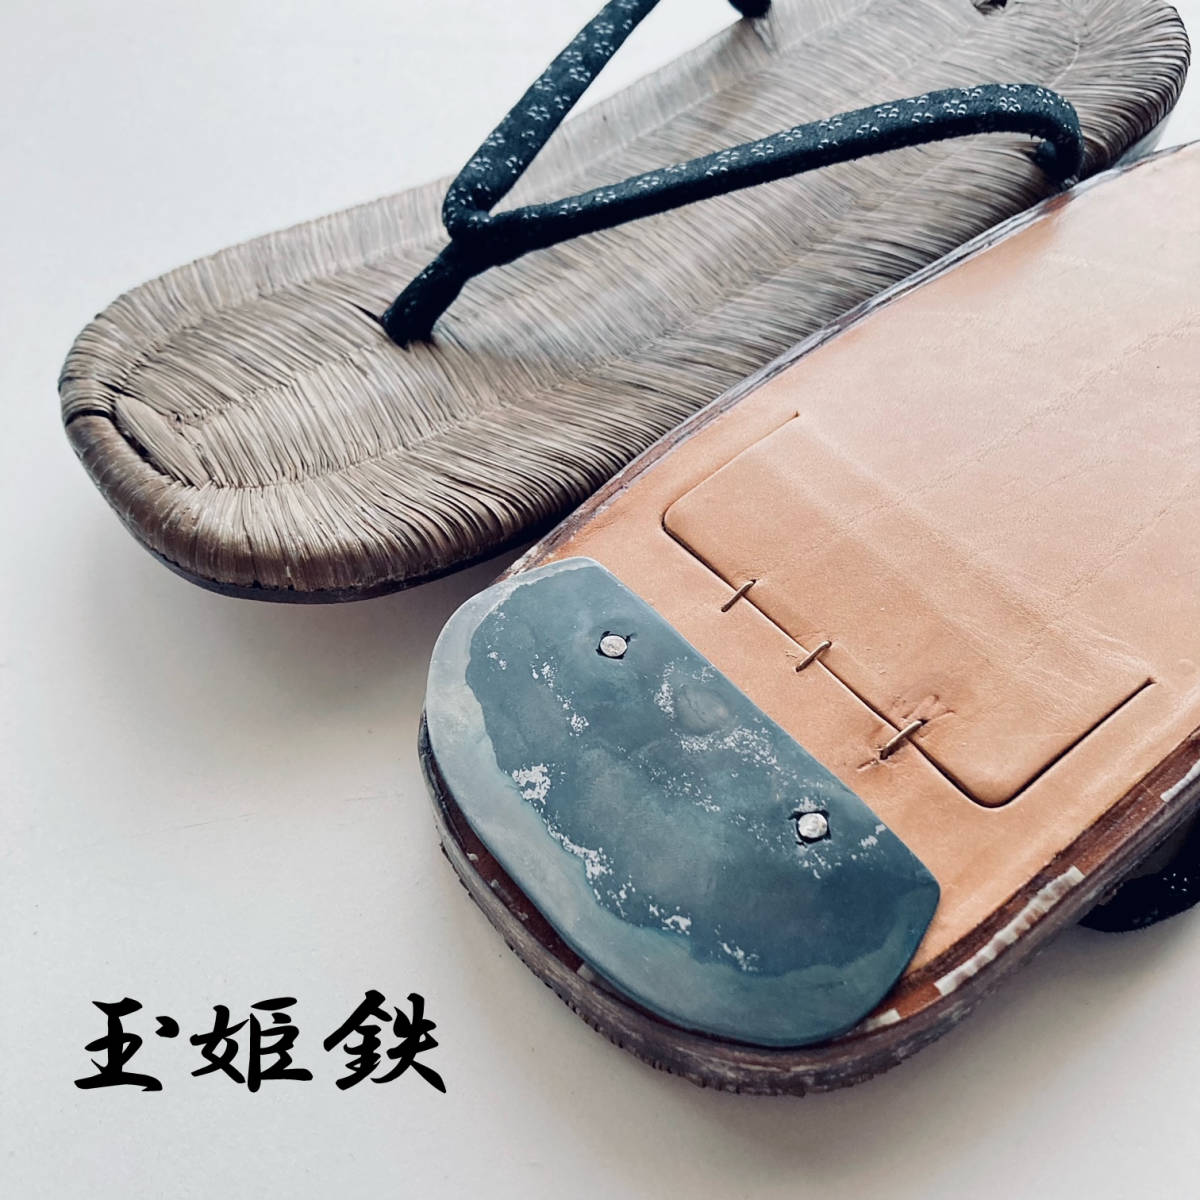  brass made forged be chisel original gold color new goods sandals setta . made in Japan sandals setta removal and re-installation possible .... rubber bottom tire reverse side also all sandals setta zori . installation possible . gold metal fittings repair 3